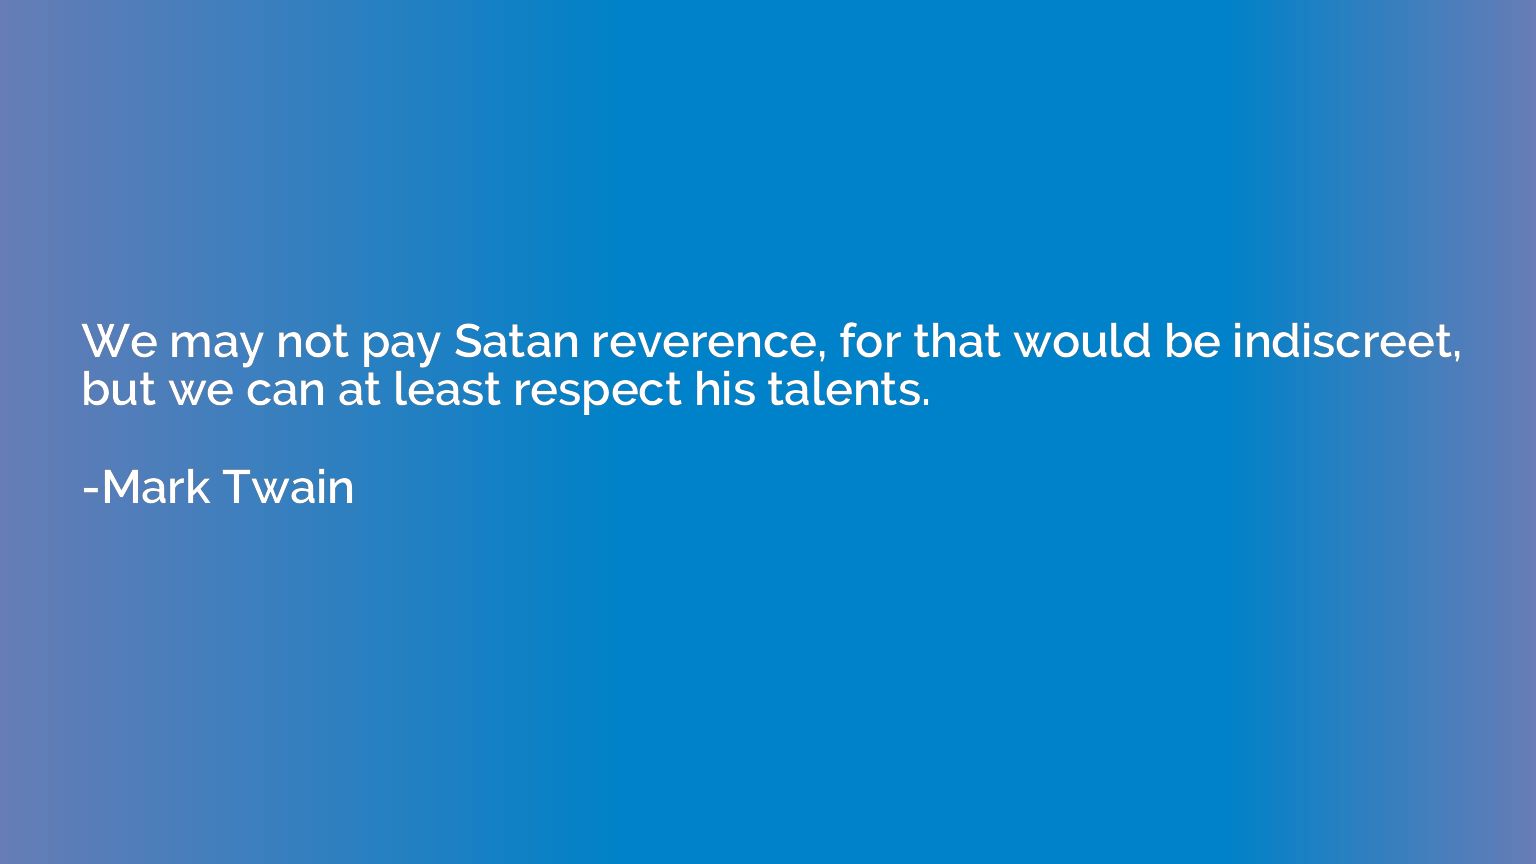 We may not pay Satan reverence, for that would be indiscreet